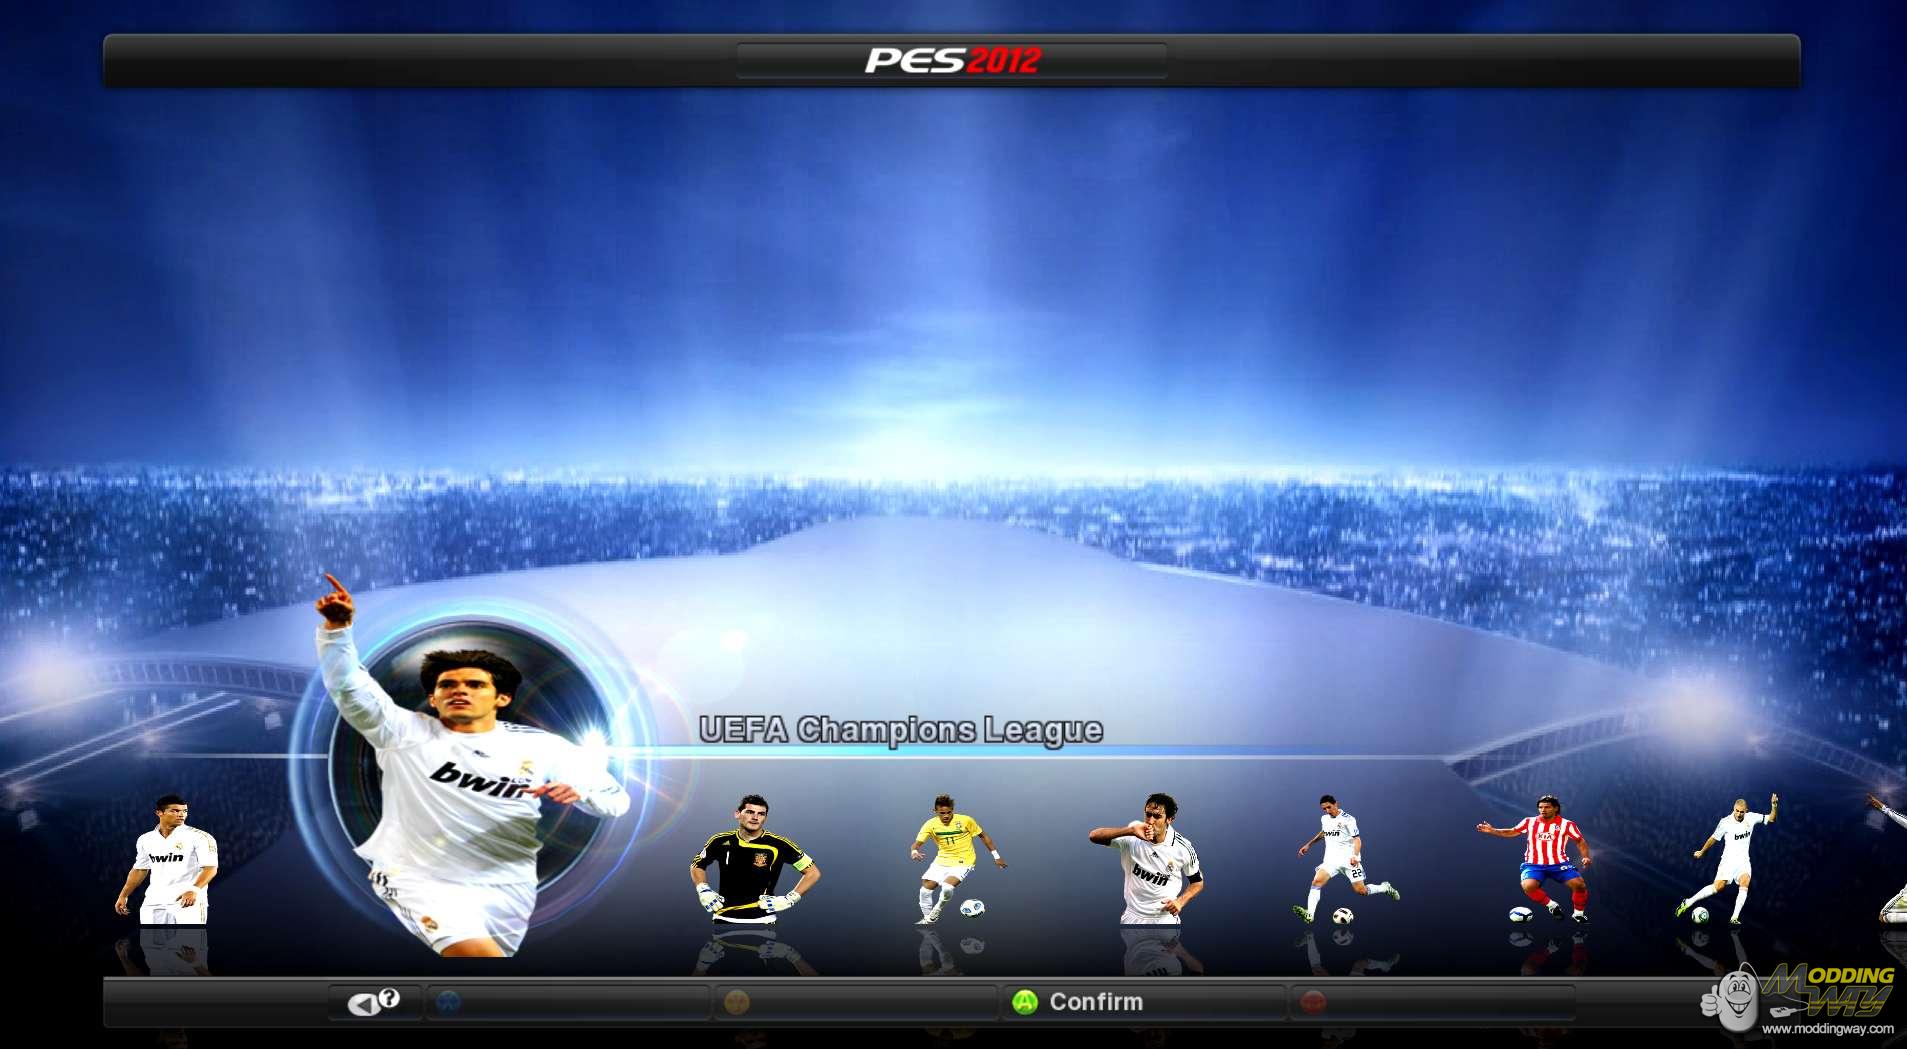 PES2012 HQ Graphic Patch - Pro Evolution Soccer 2012 at ModdingWay